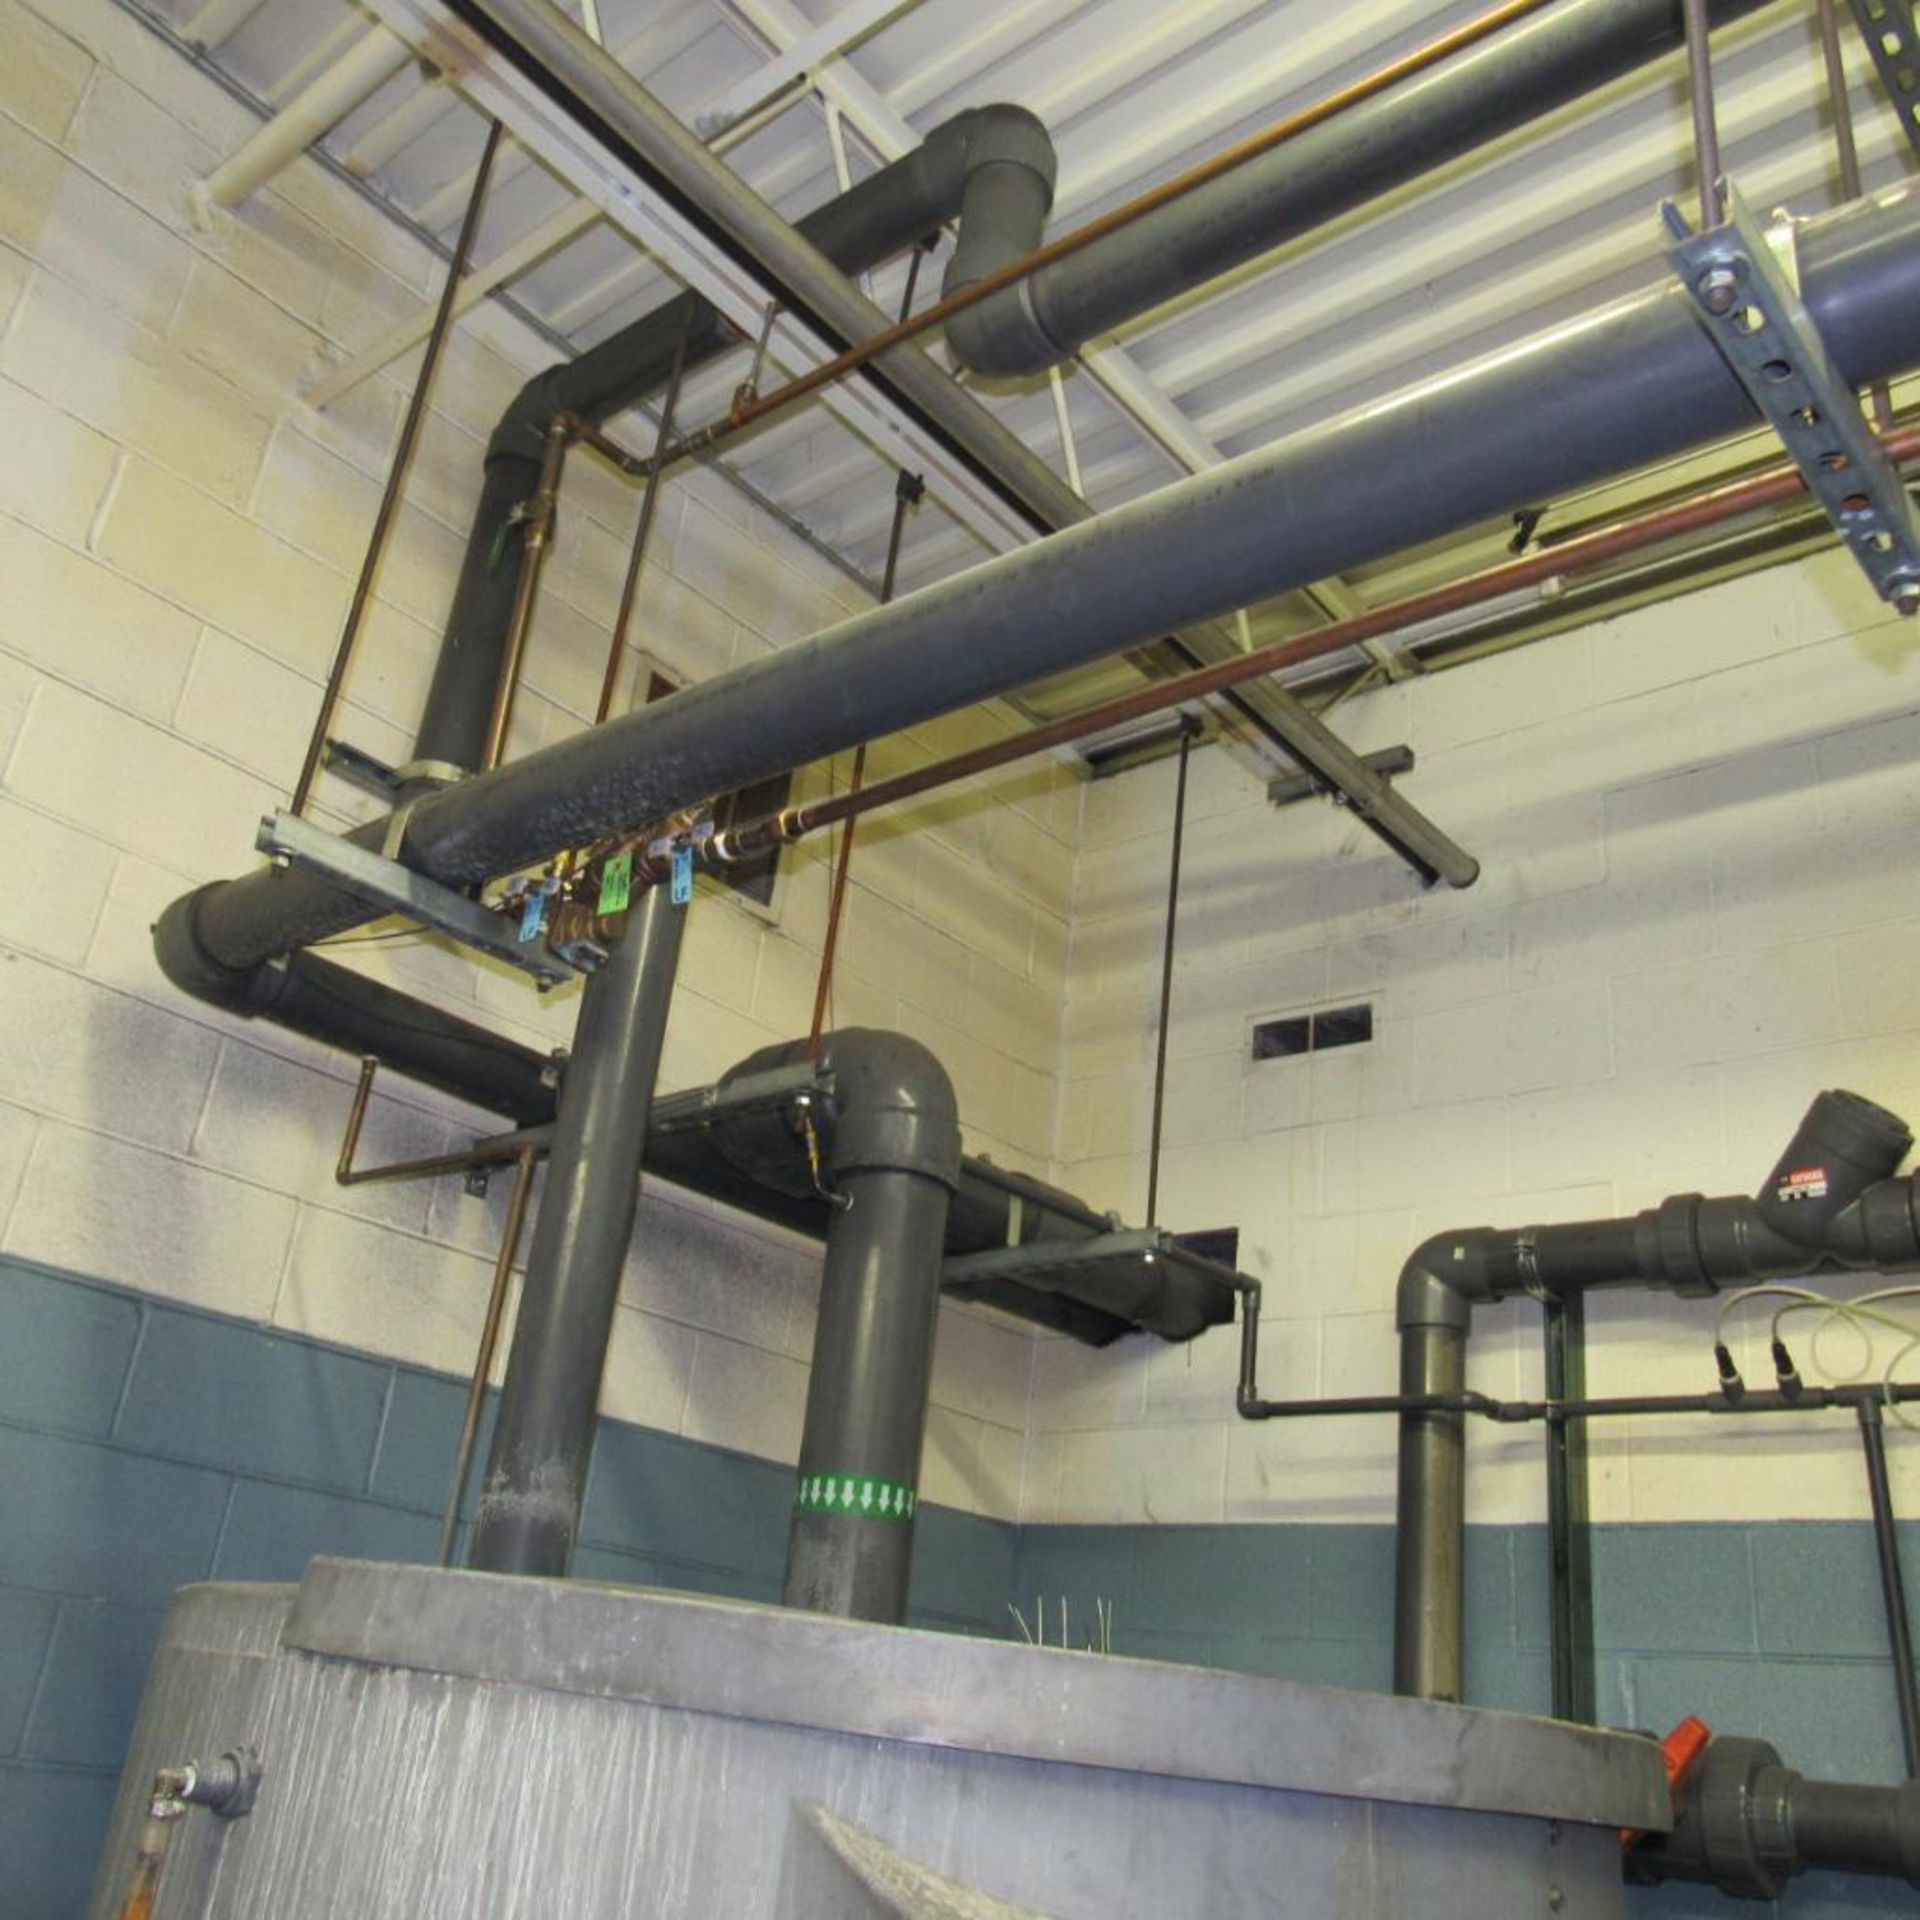 Advantage Chiller System, PTS Control, (3) Pumps, Roof Mounted Tank, TTK-850 (Location: Bldg. 1) - Image 8 of 11